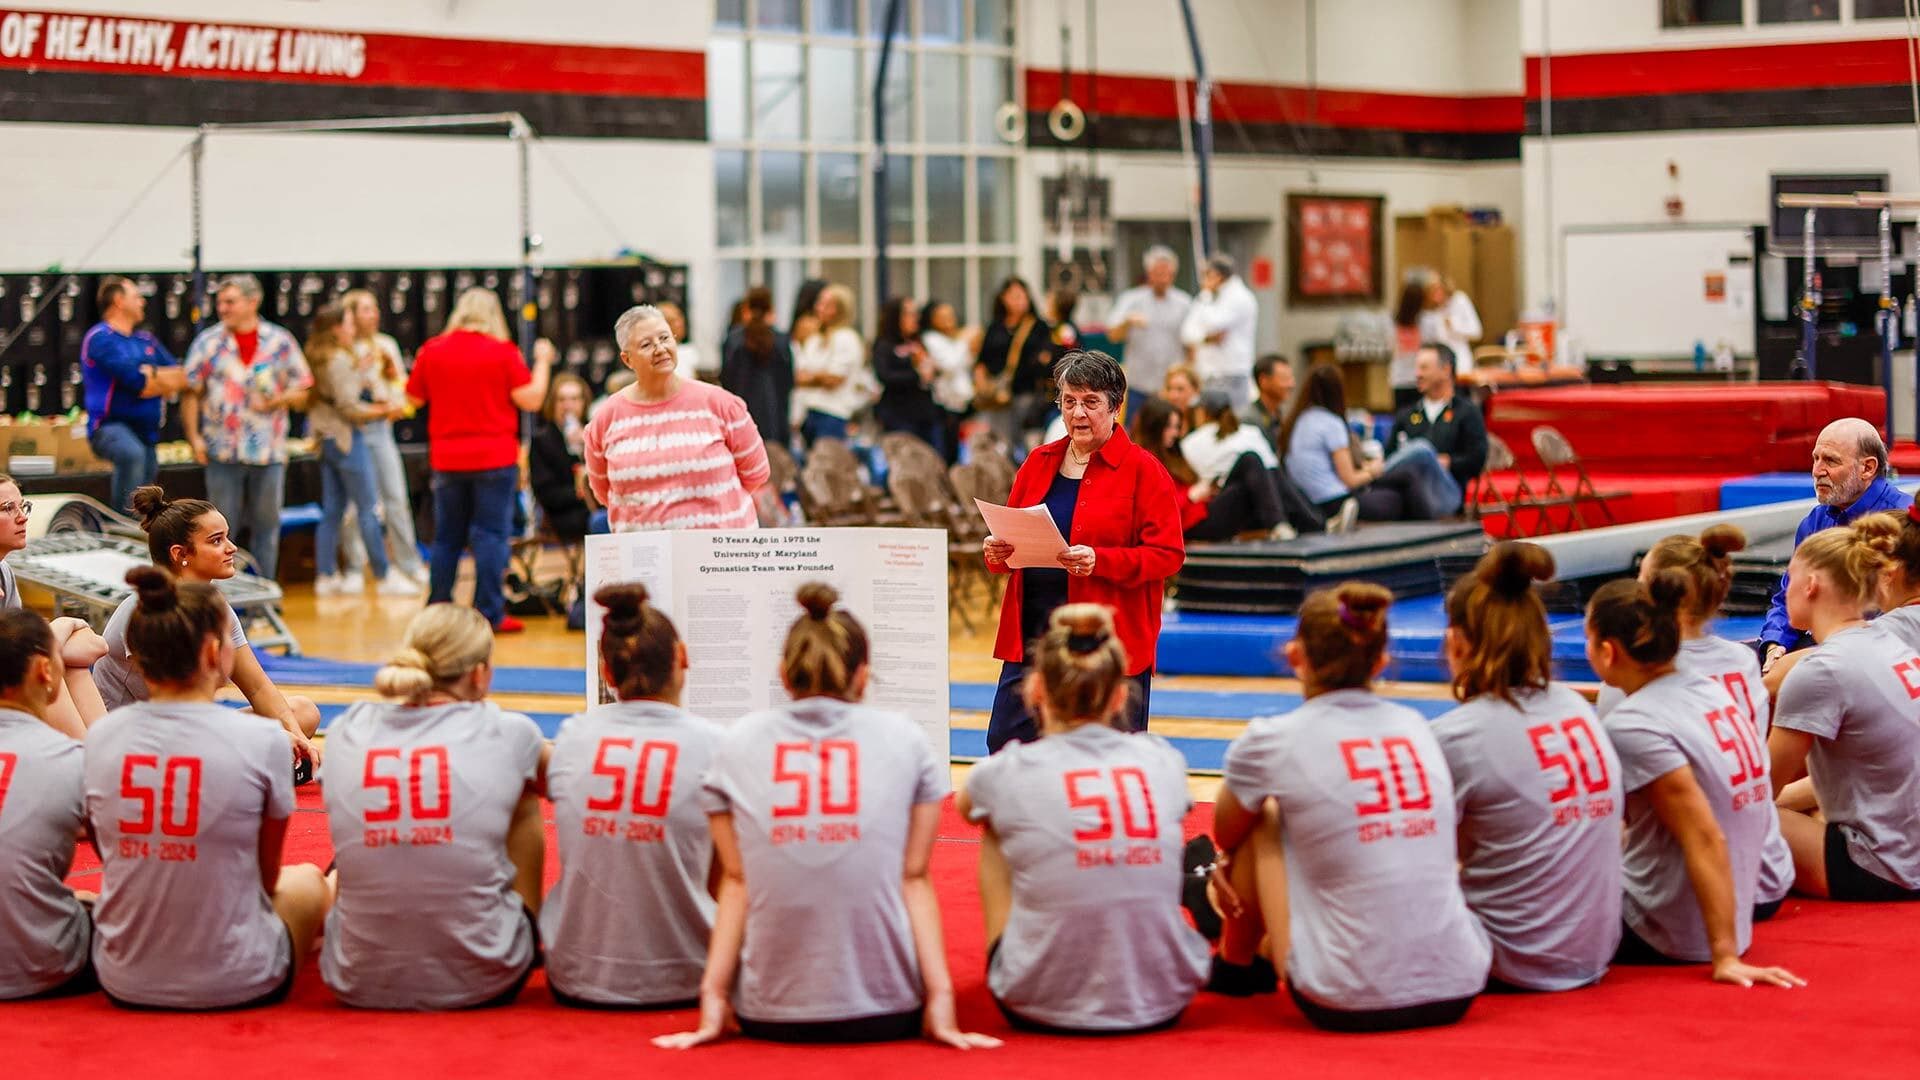 Two older women speak to a team of seated younger women in a gym